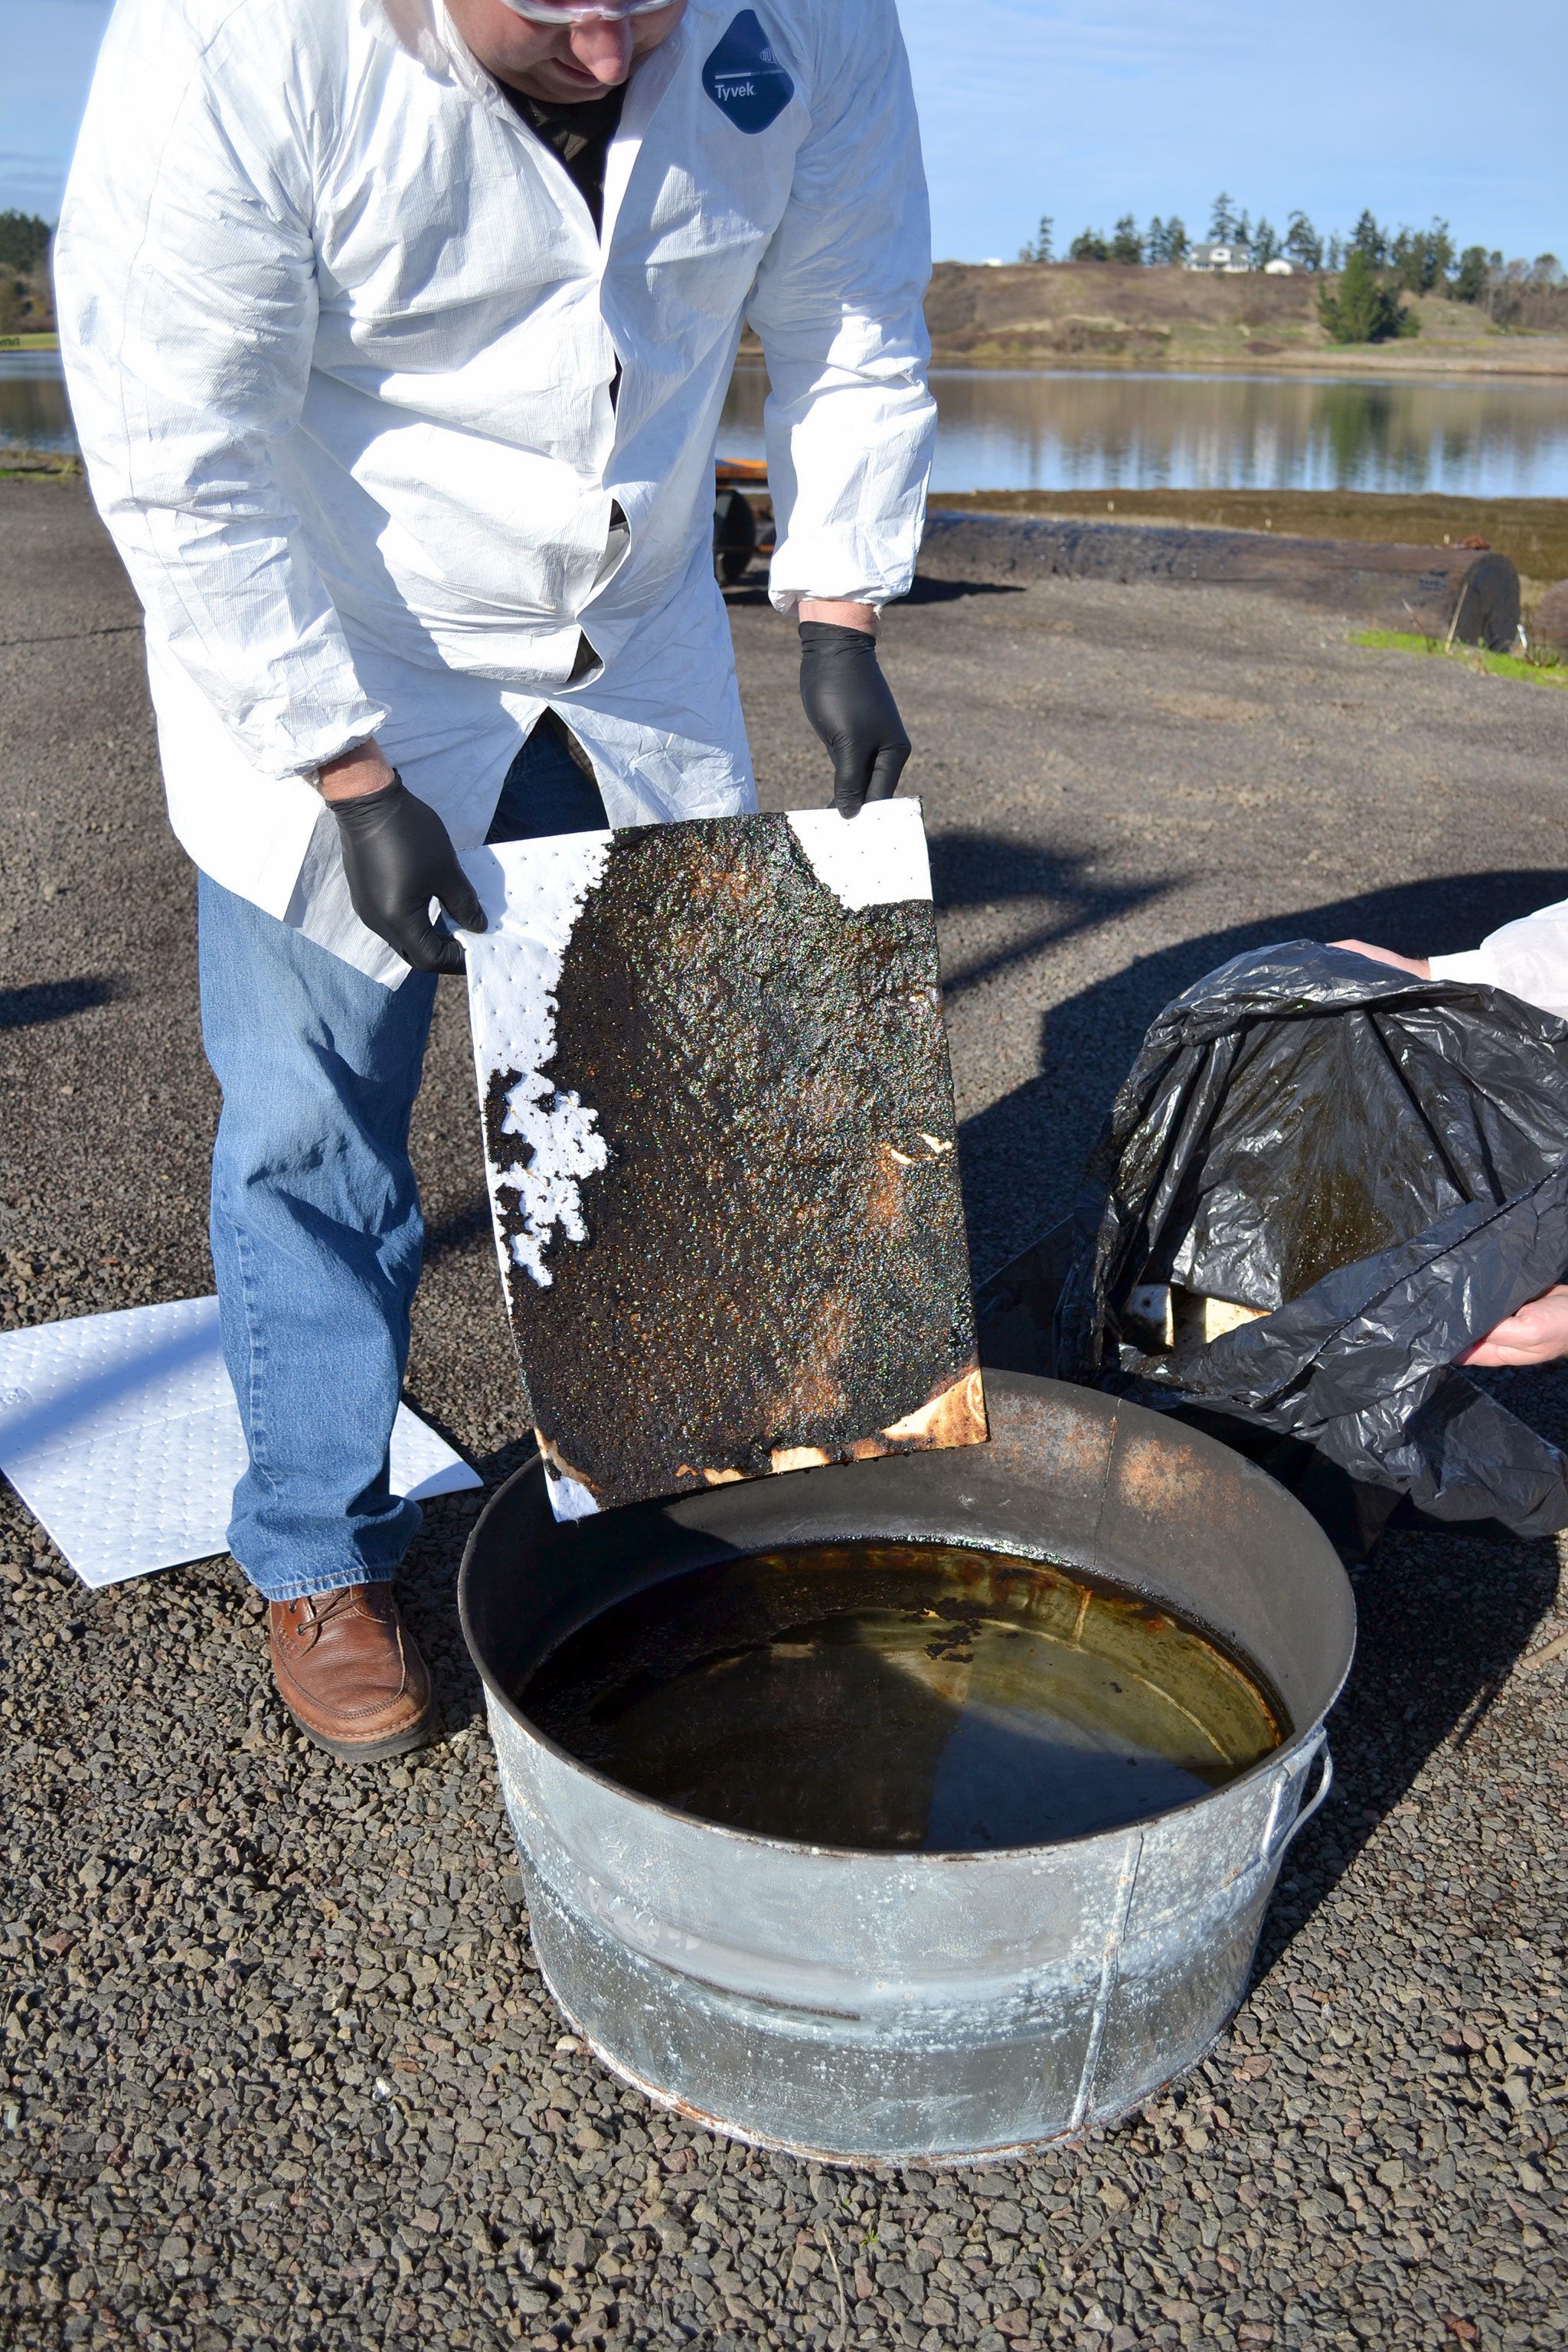 These absorbent pads measure how much oil is left over after it’s burned using a wood product scientists created with wood shavings. Their goal is to burn at least 90 percent of the oil of the water. (Matthew Nash/Olympic Peninsula News Group)